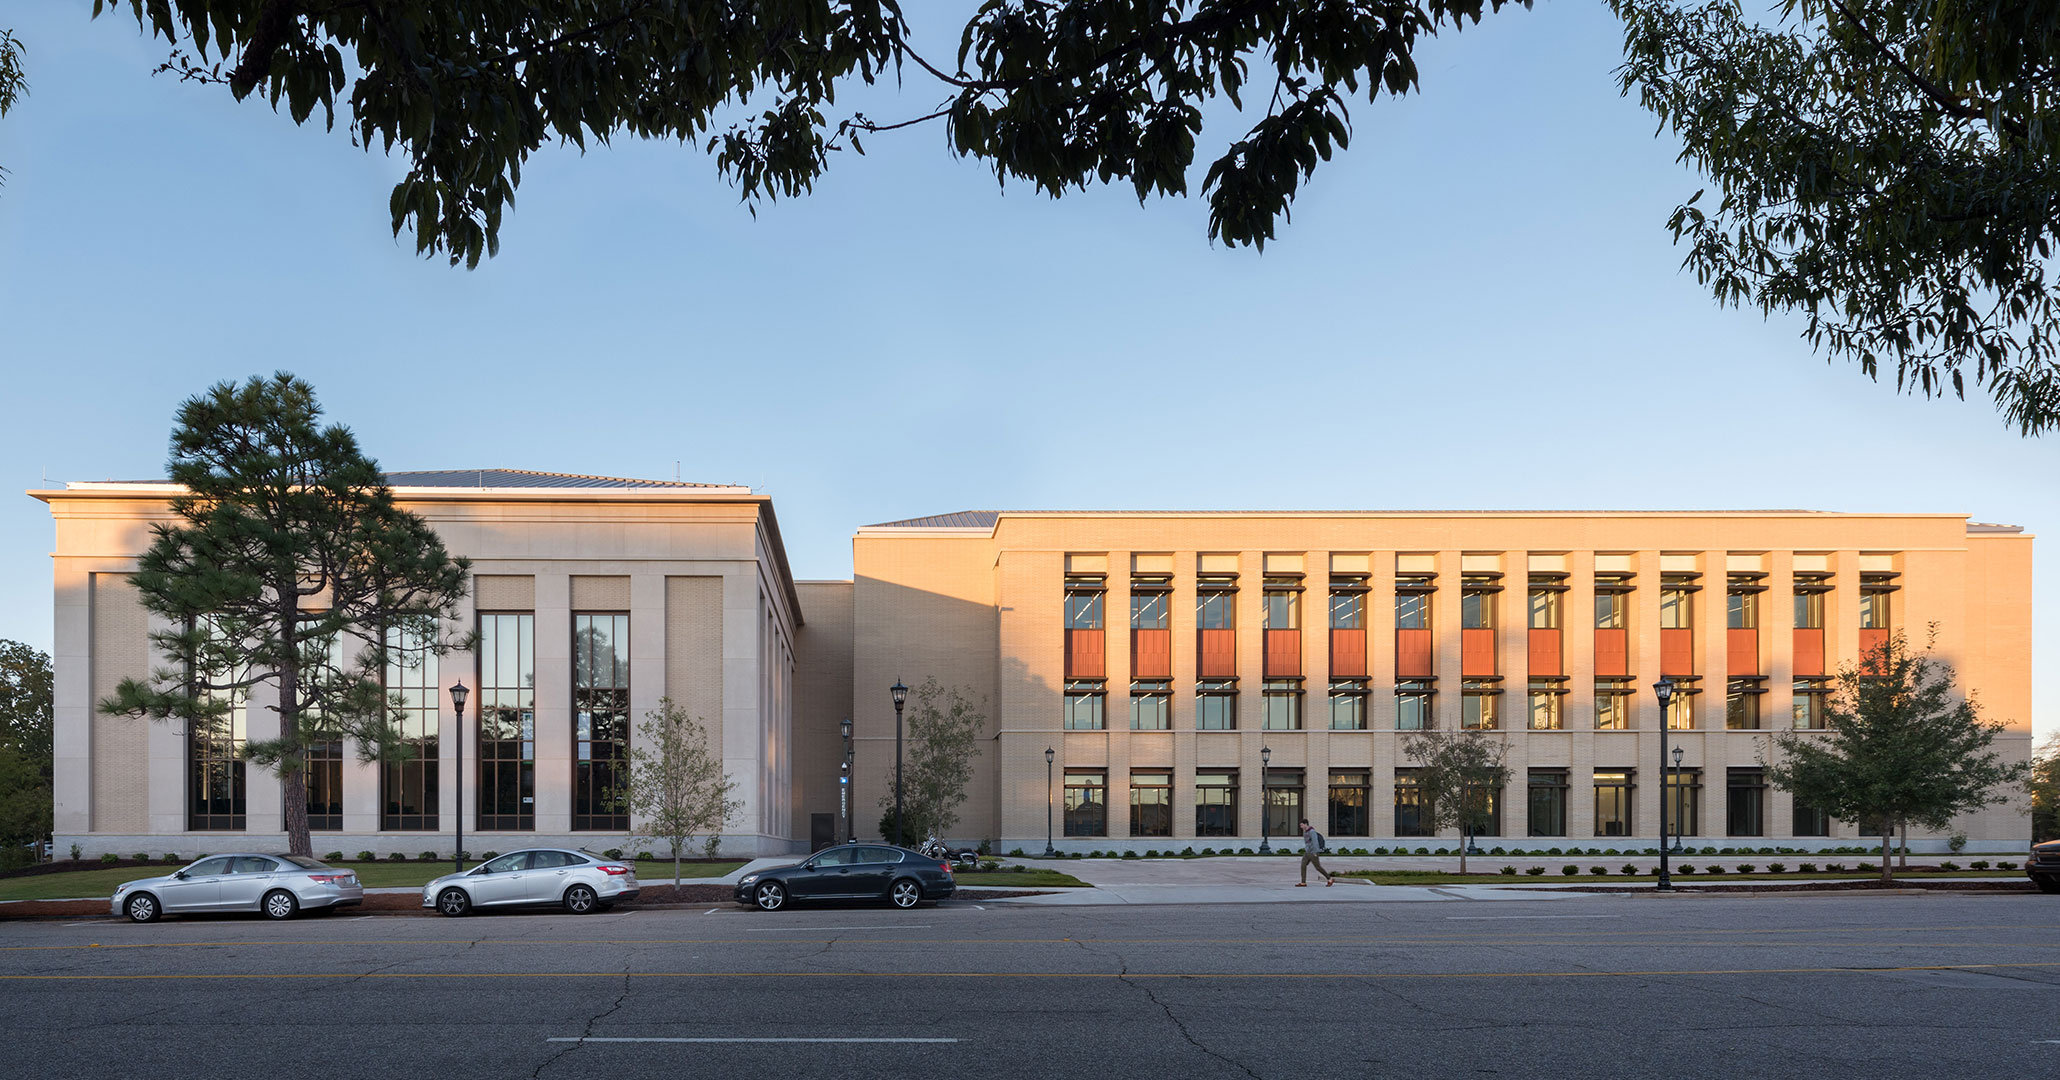 University of South Carolina worked with Boudreaux architects to design the new prestigious Law School.